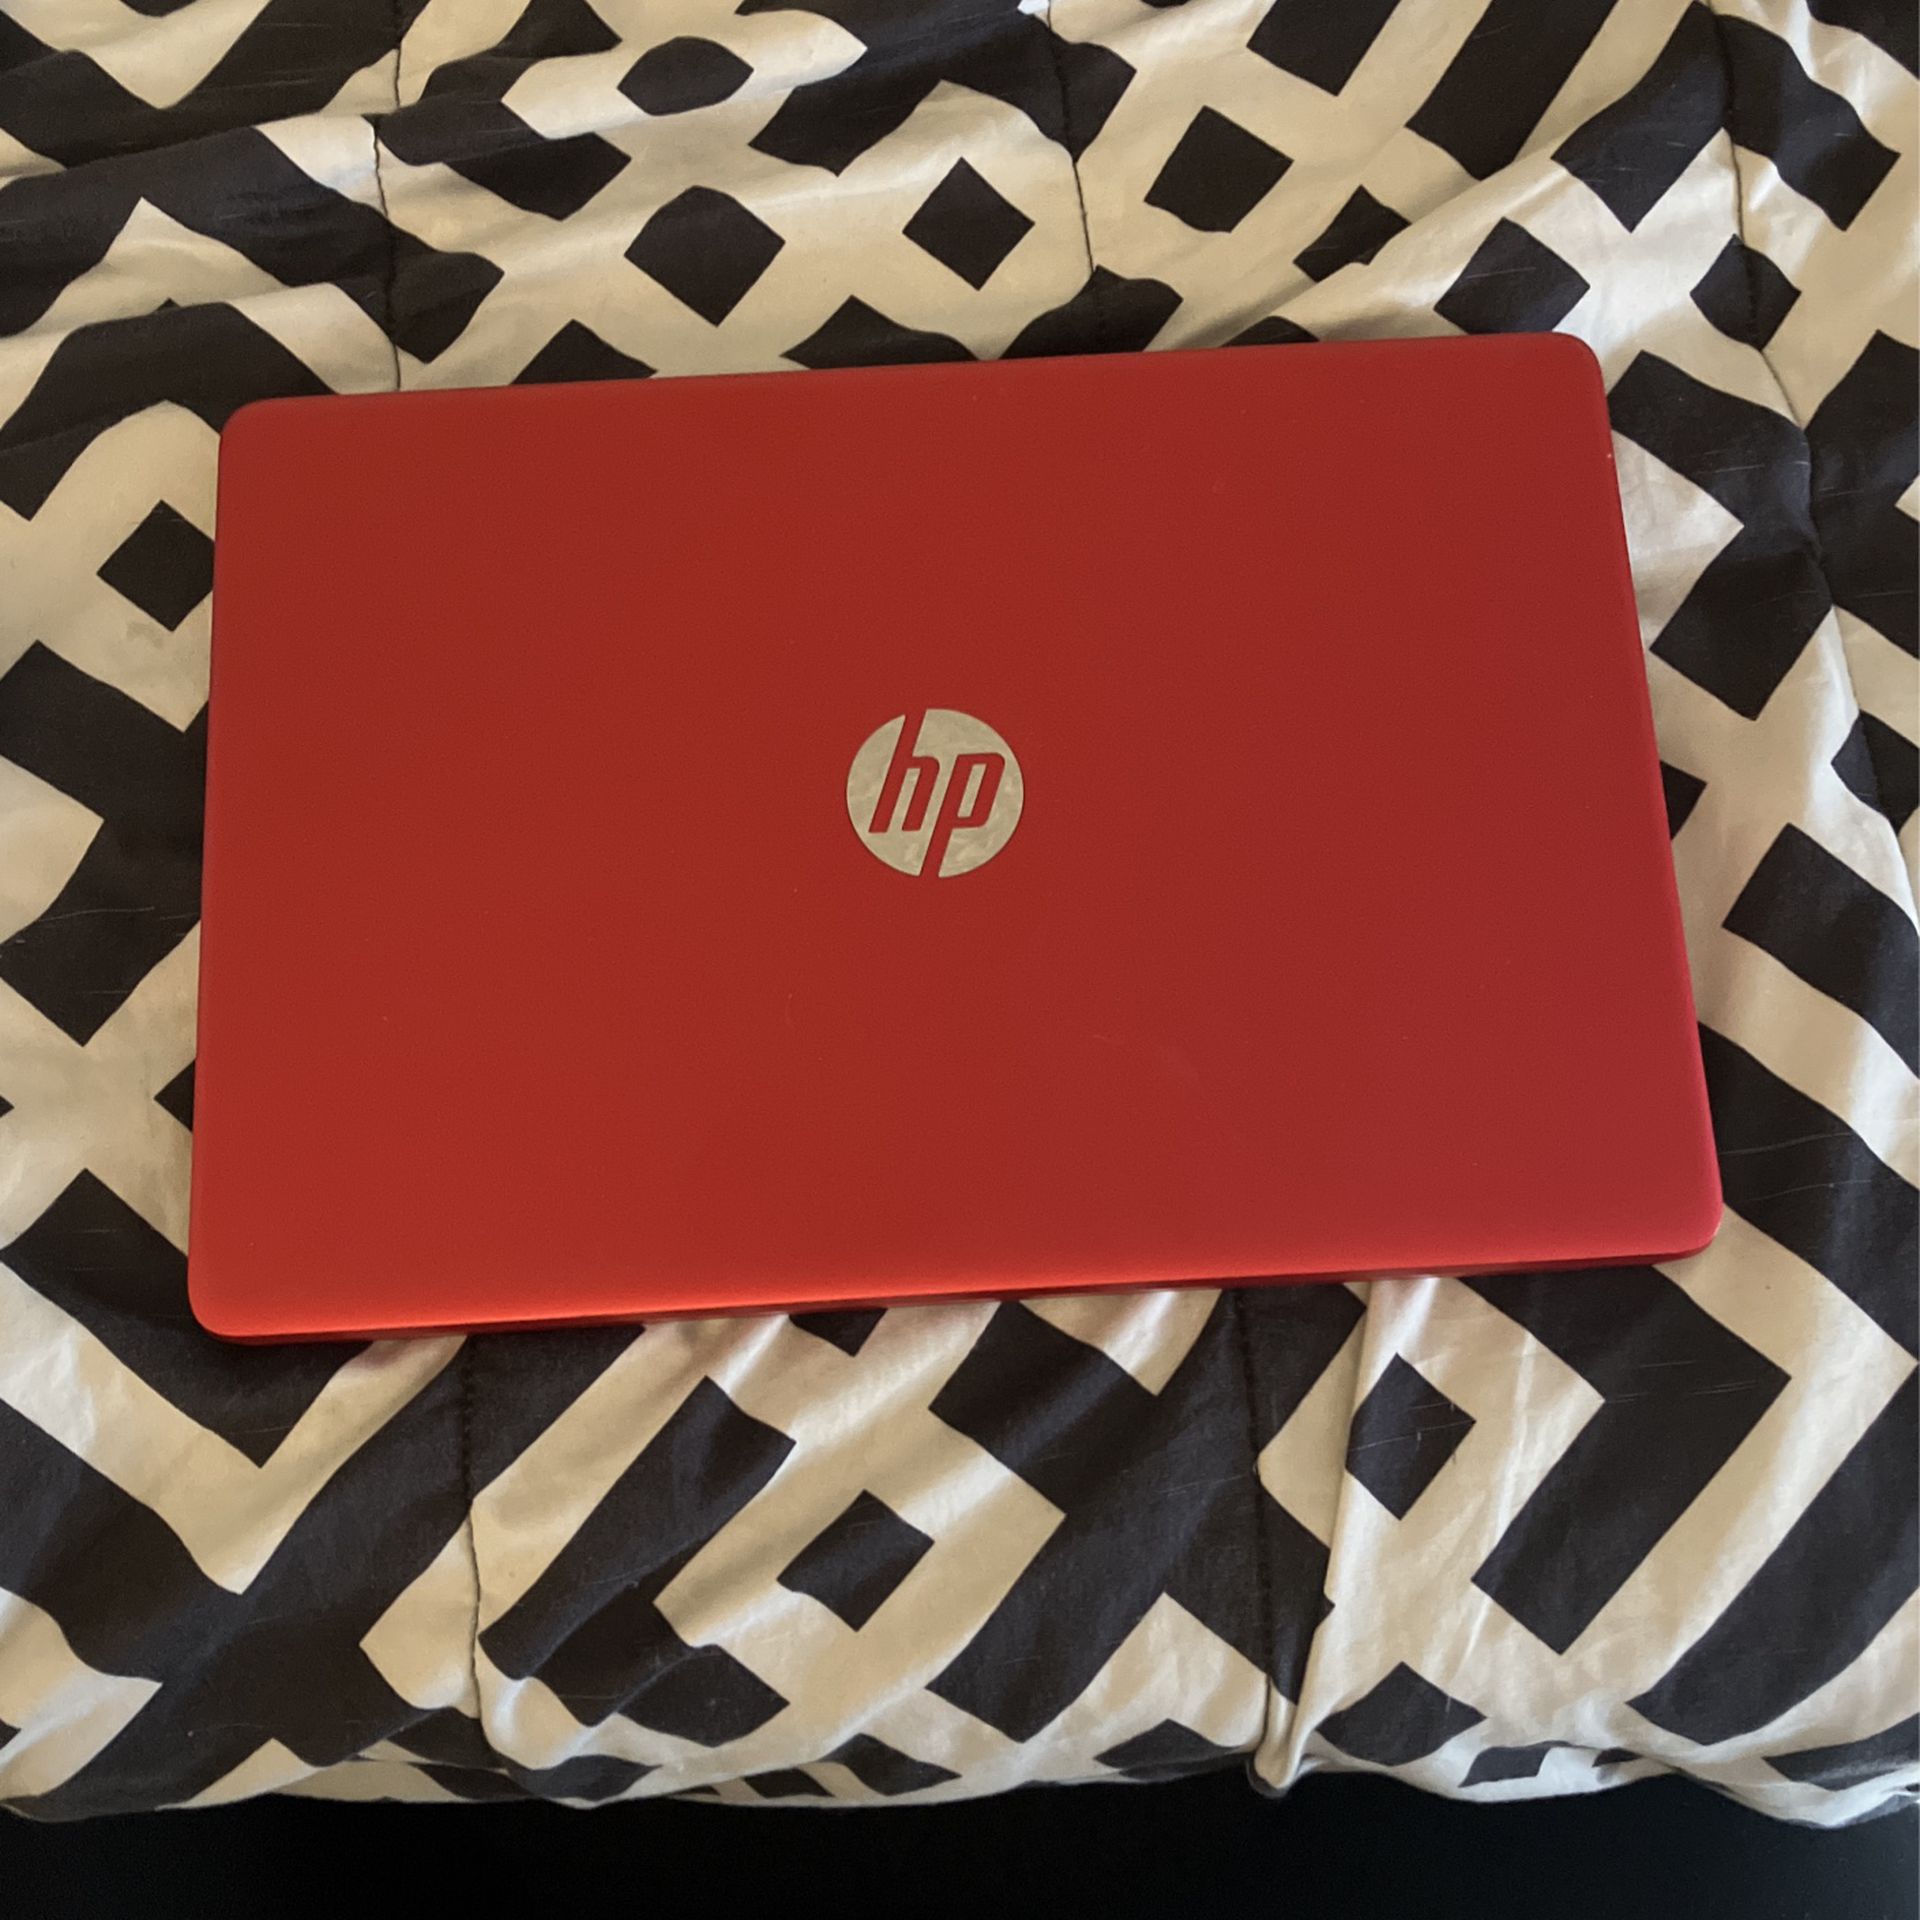 Laptop Hardly Used For Sale